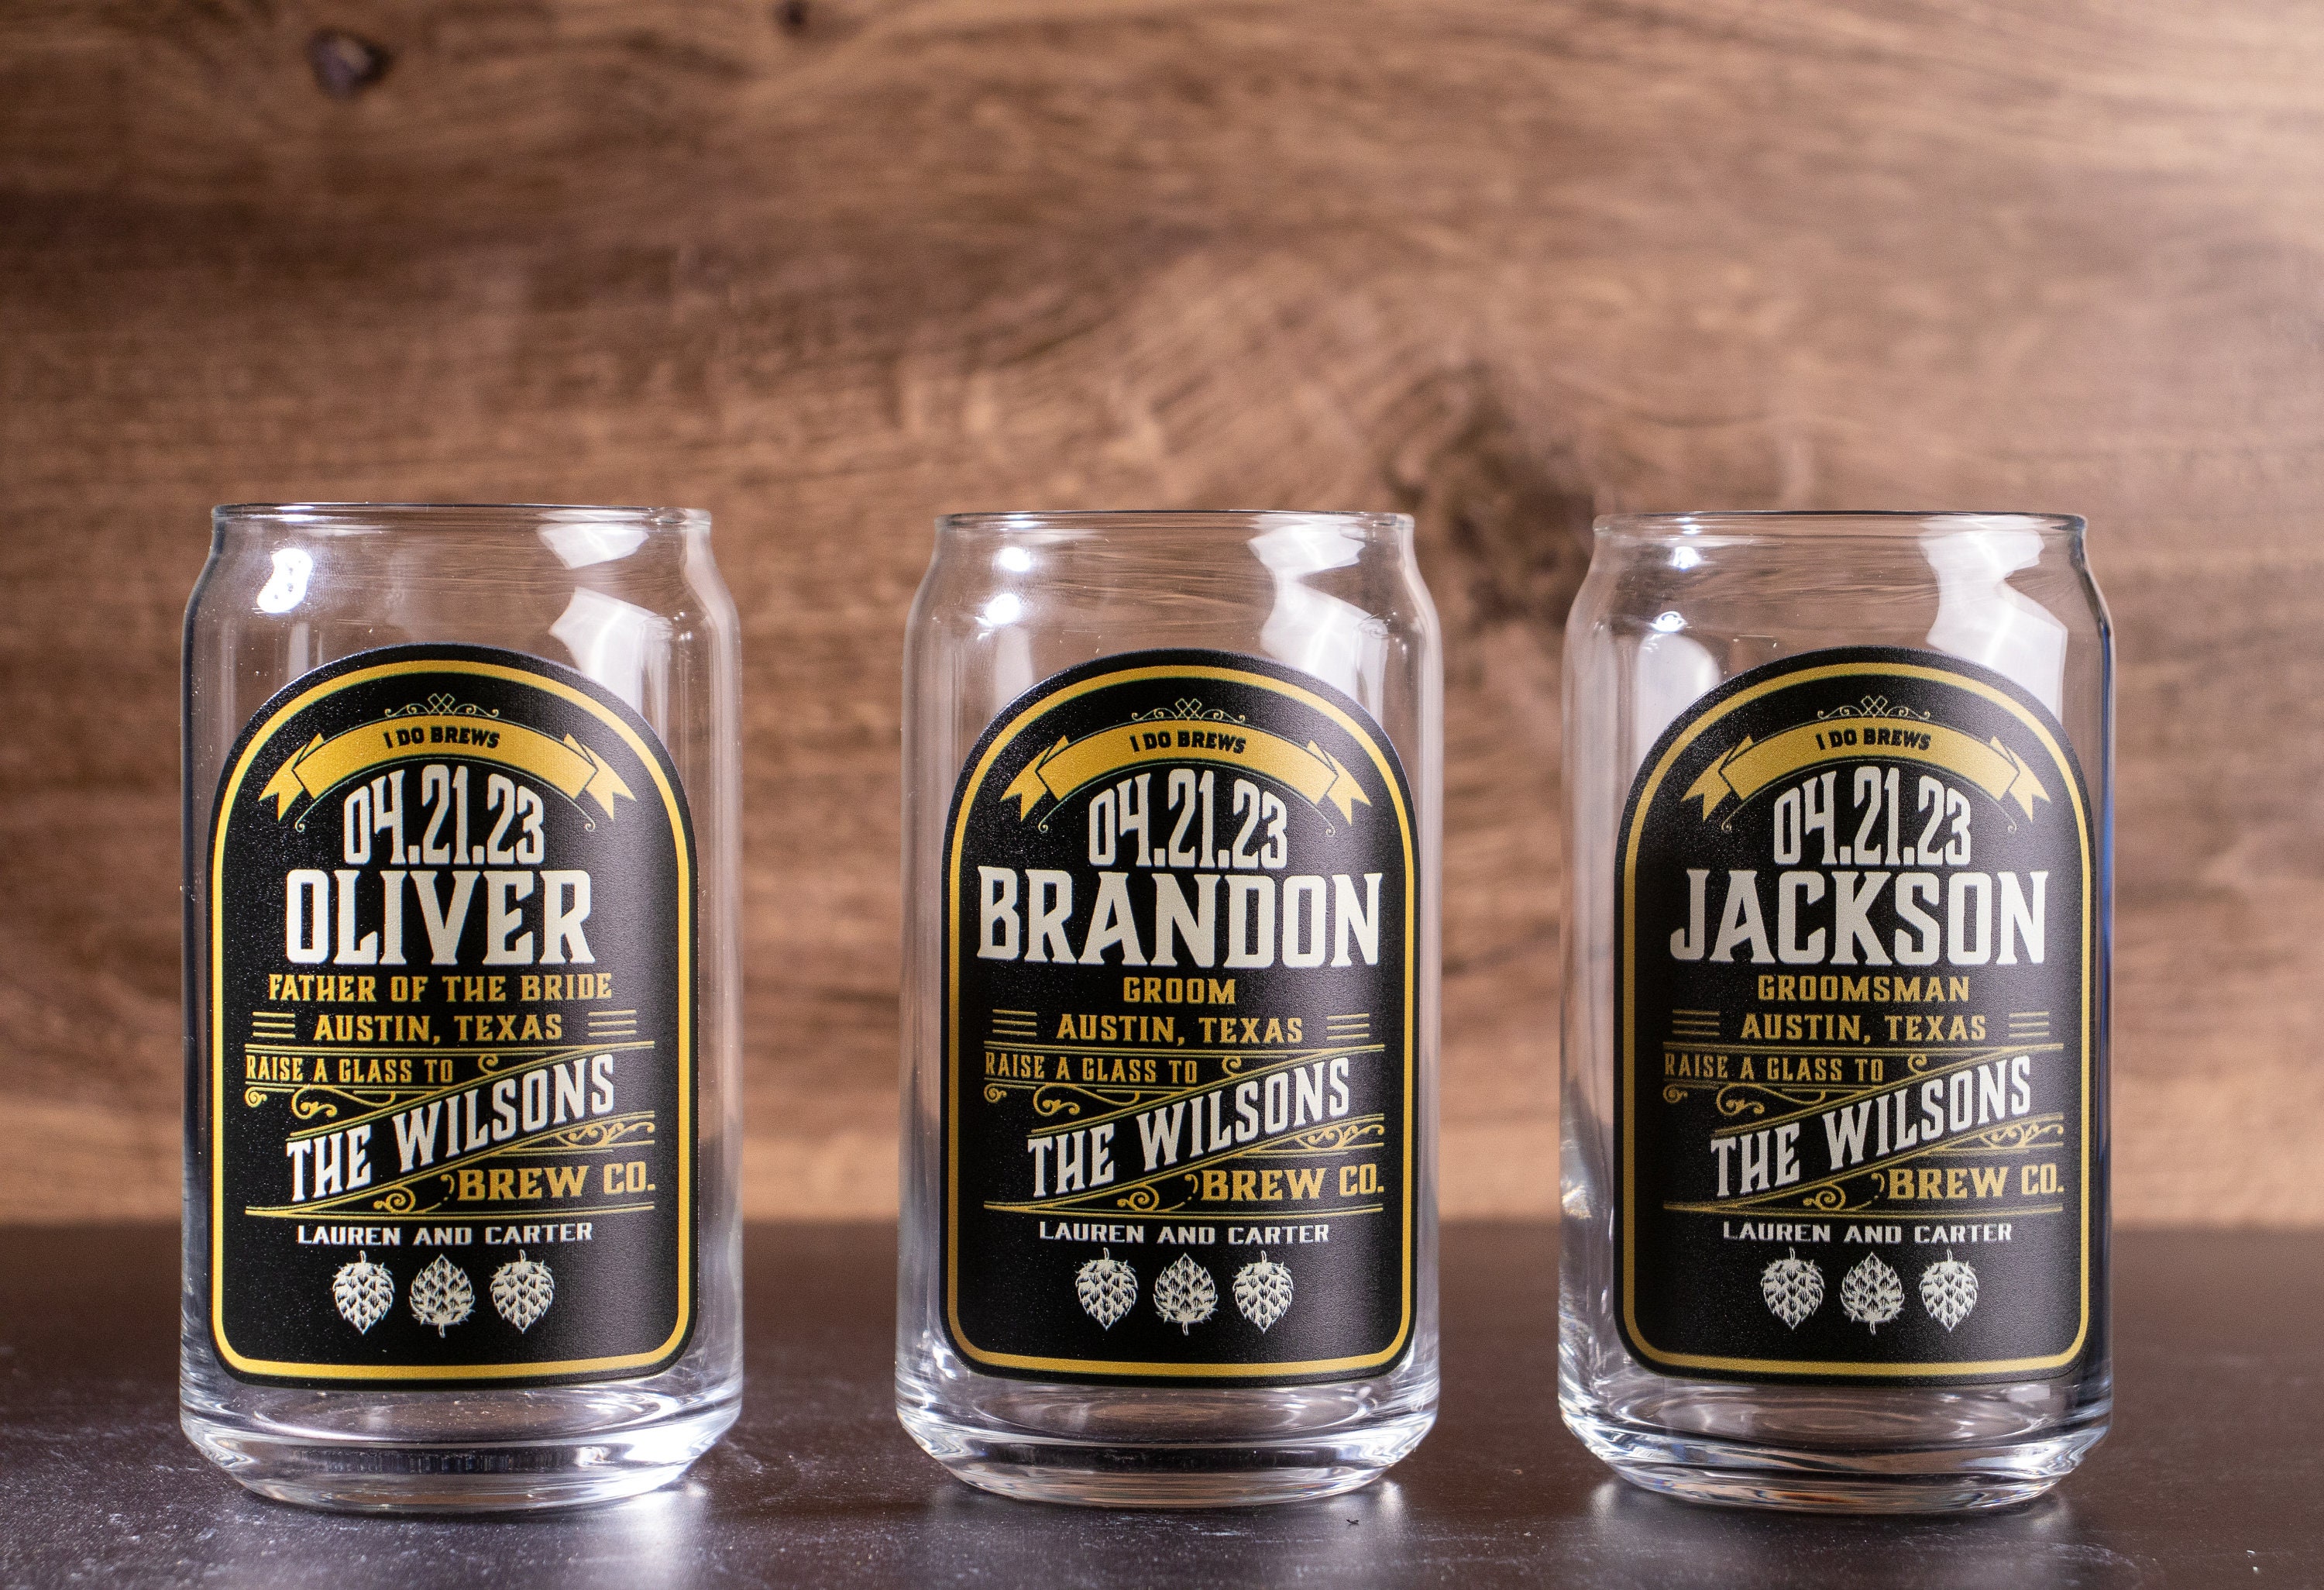 25 Bachelor Party Favors to Make Your Party a Hit - Forever